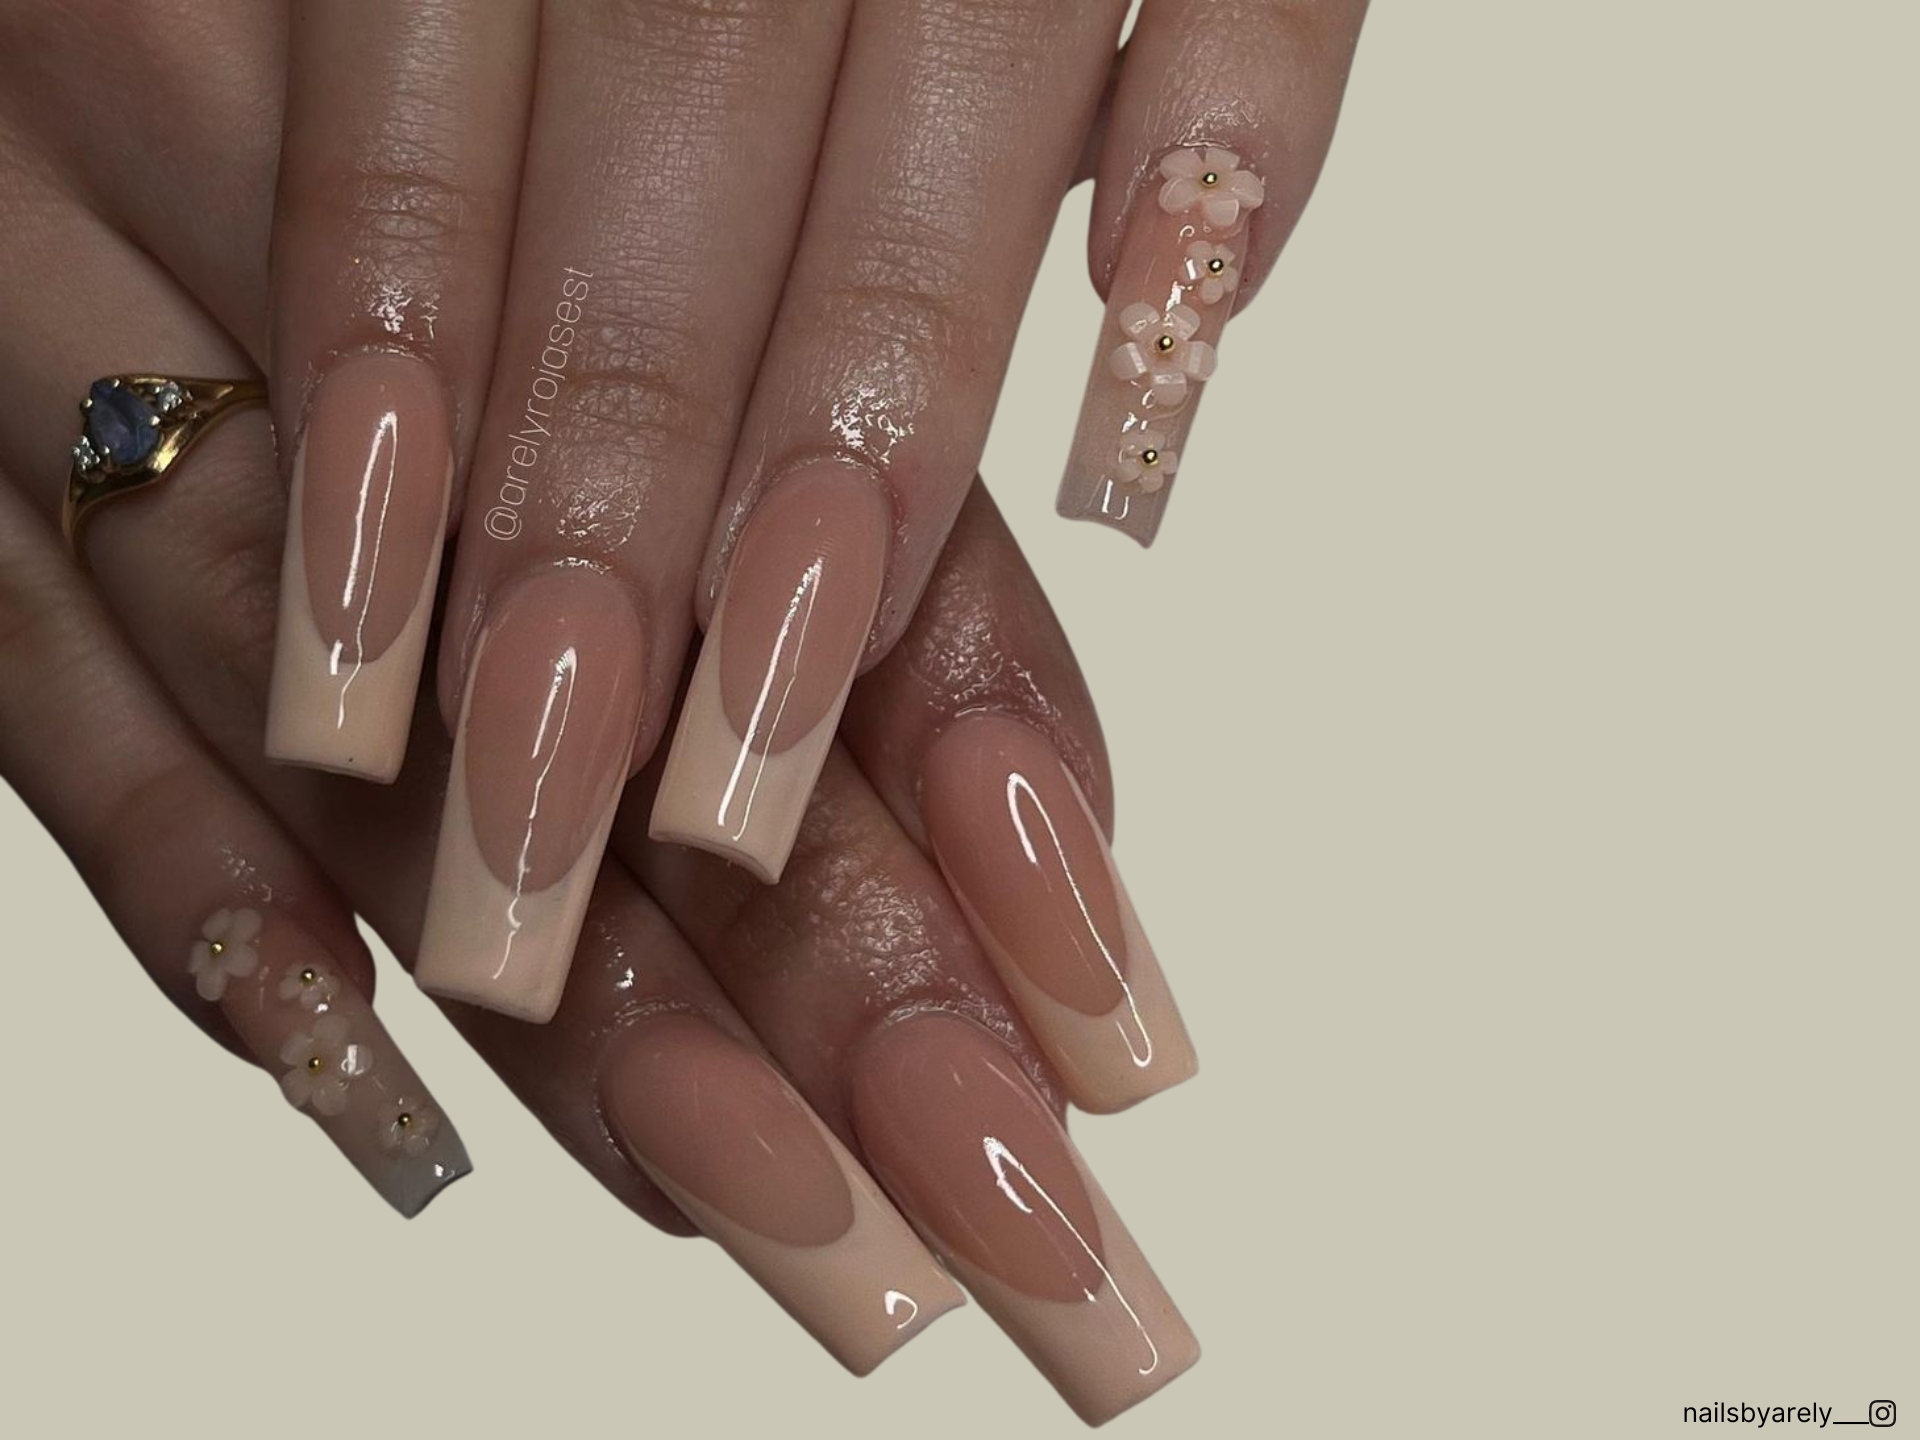 These 20 Nude Nails Are A Minimalistic Trend Sweeping Social Media